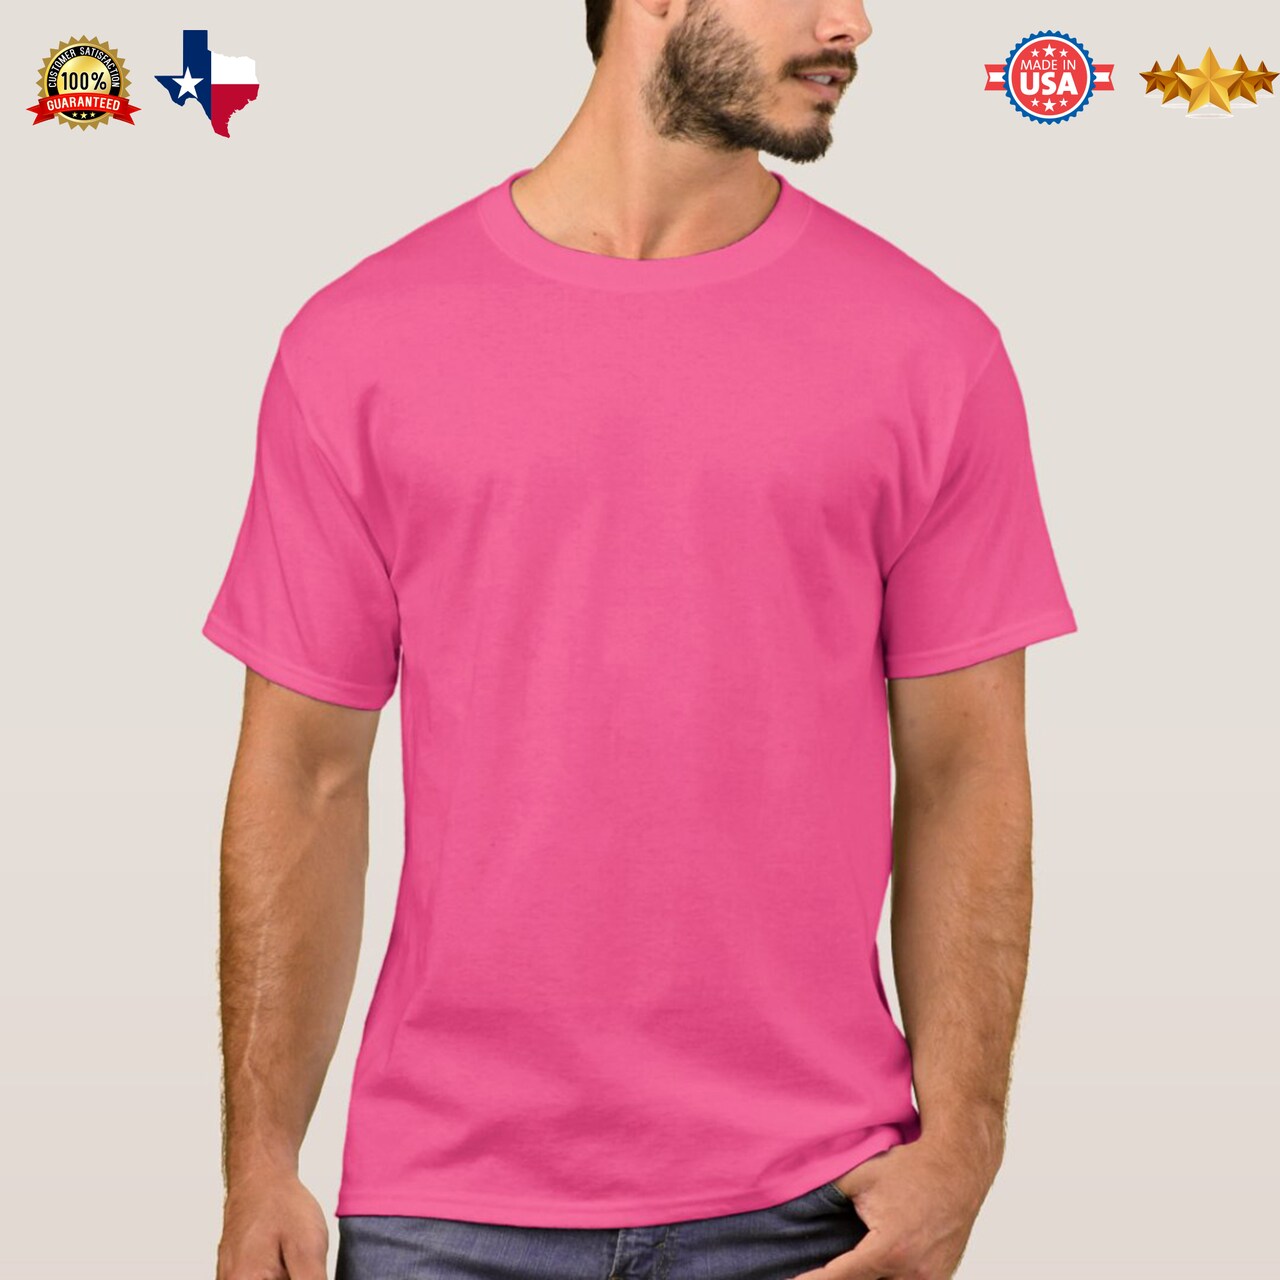 Blank Men Shirts, Basic Unisex Classic Fit Tees, Trendy Soft Gildan Vintage Colored Shirts For Men, Basic Men and Women T-Shirts - A Must-Have for Every Wardrobe | RADYAN